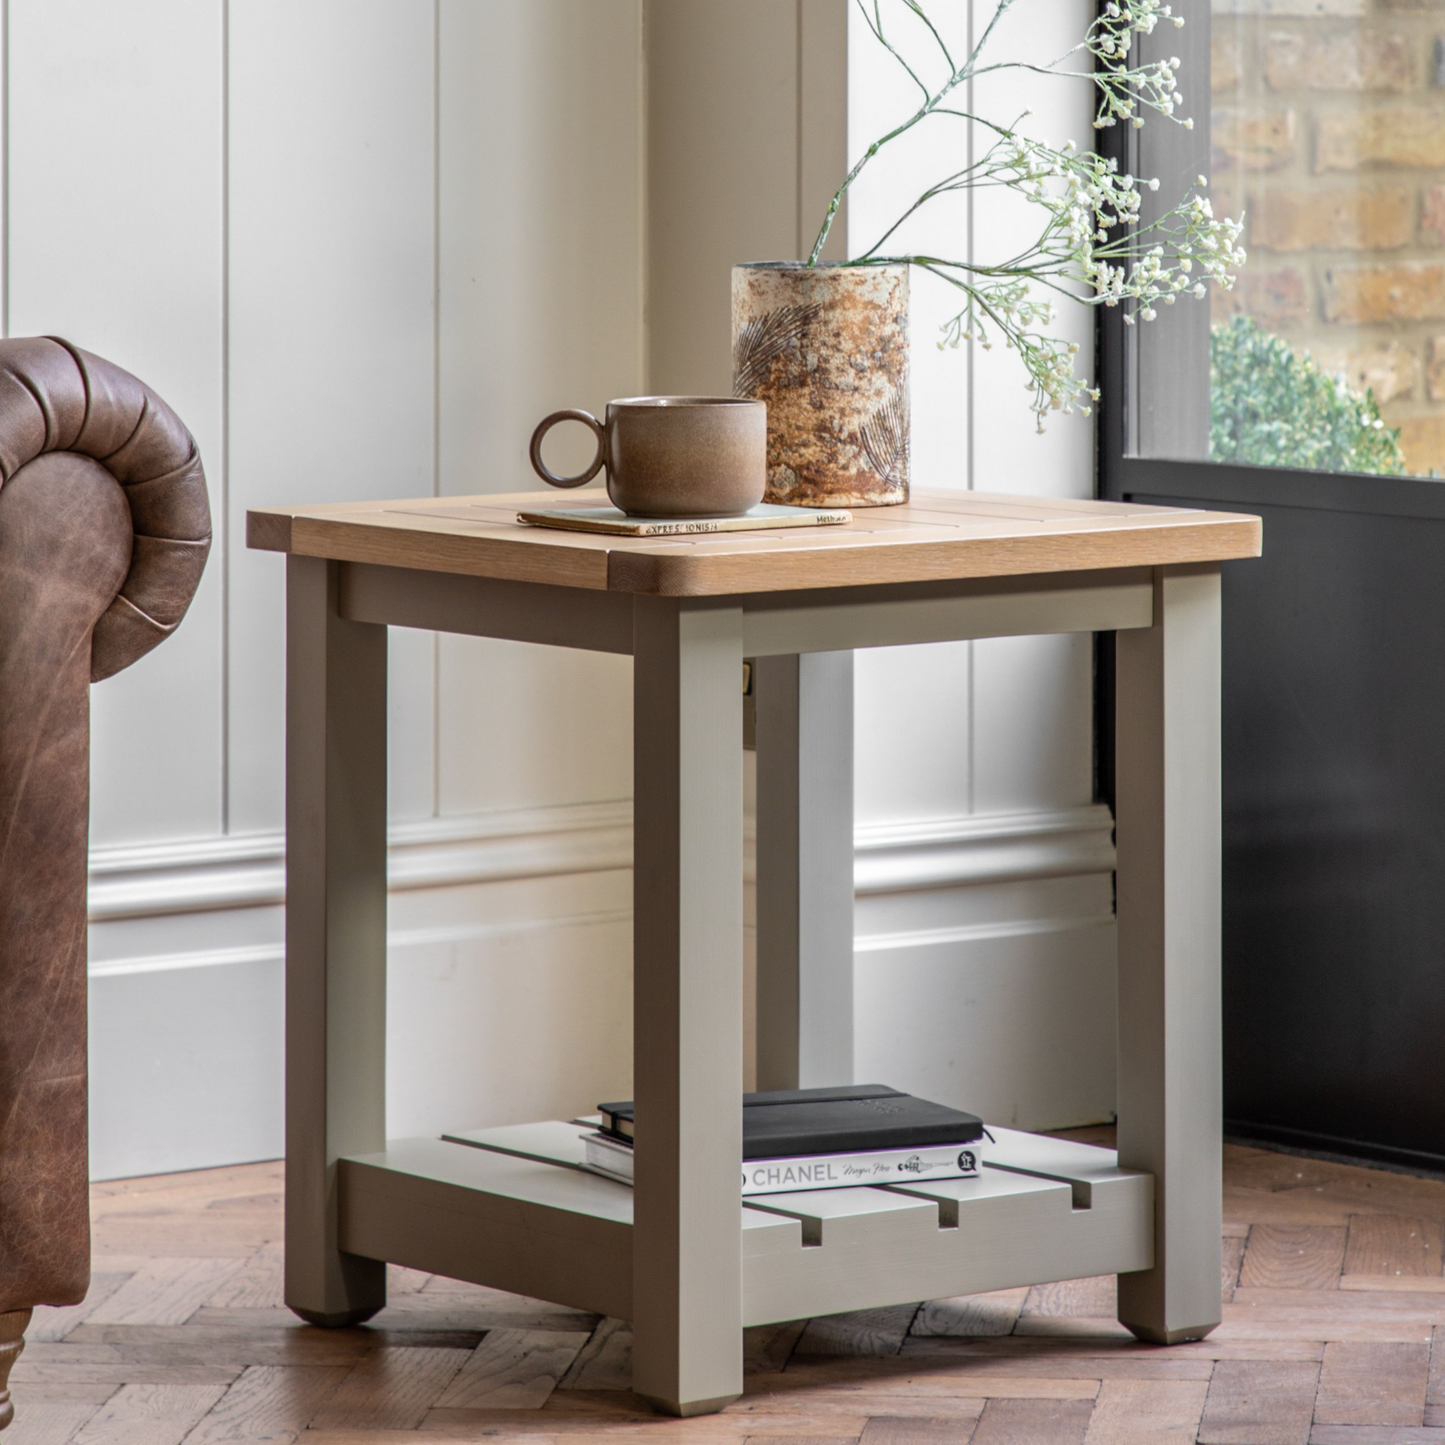 A Buckland Side Table in Prairie from Kikiathome.co.uk with a book and a cup of coffee, perfect for interior decor and home furniture.